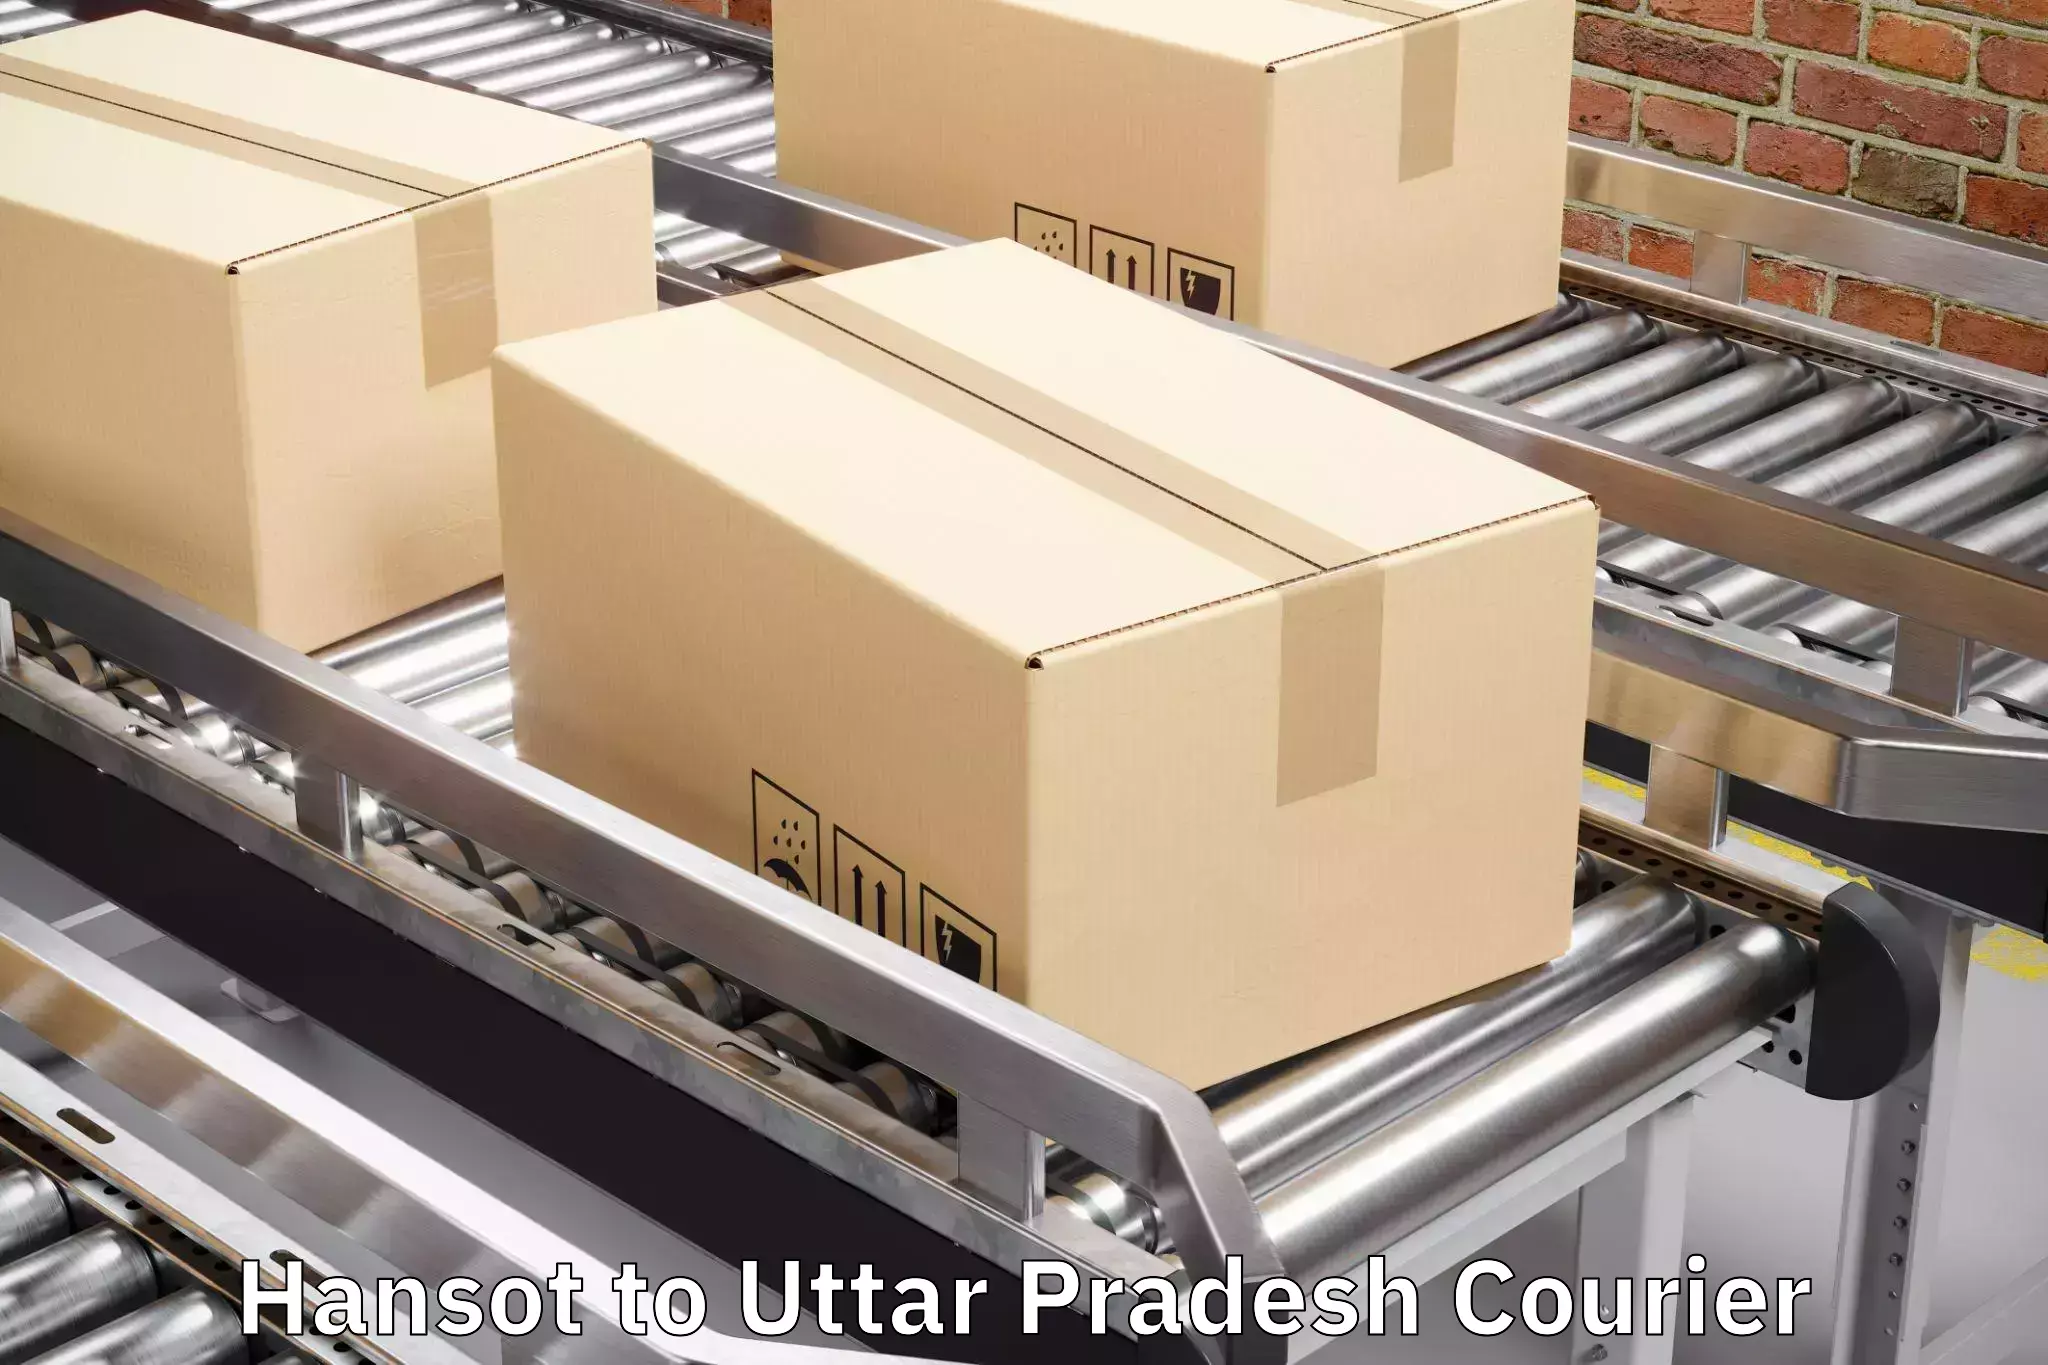 Baggage relocation service Hansot to Unnao